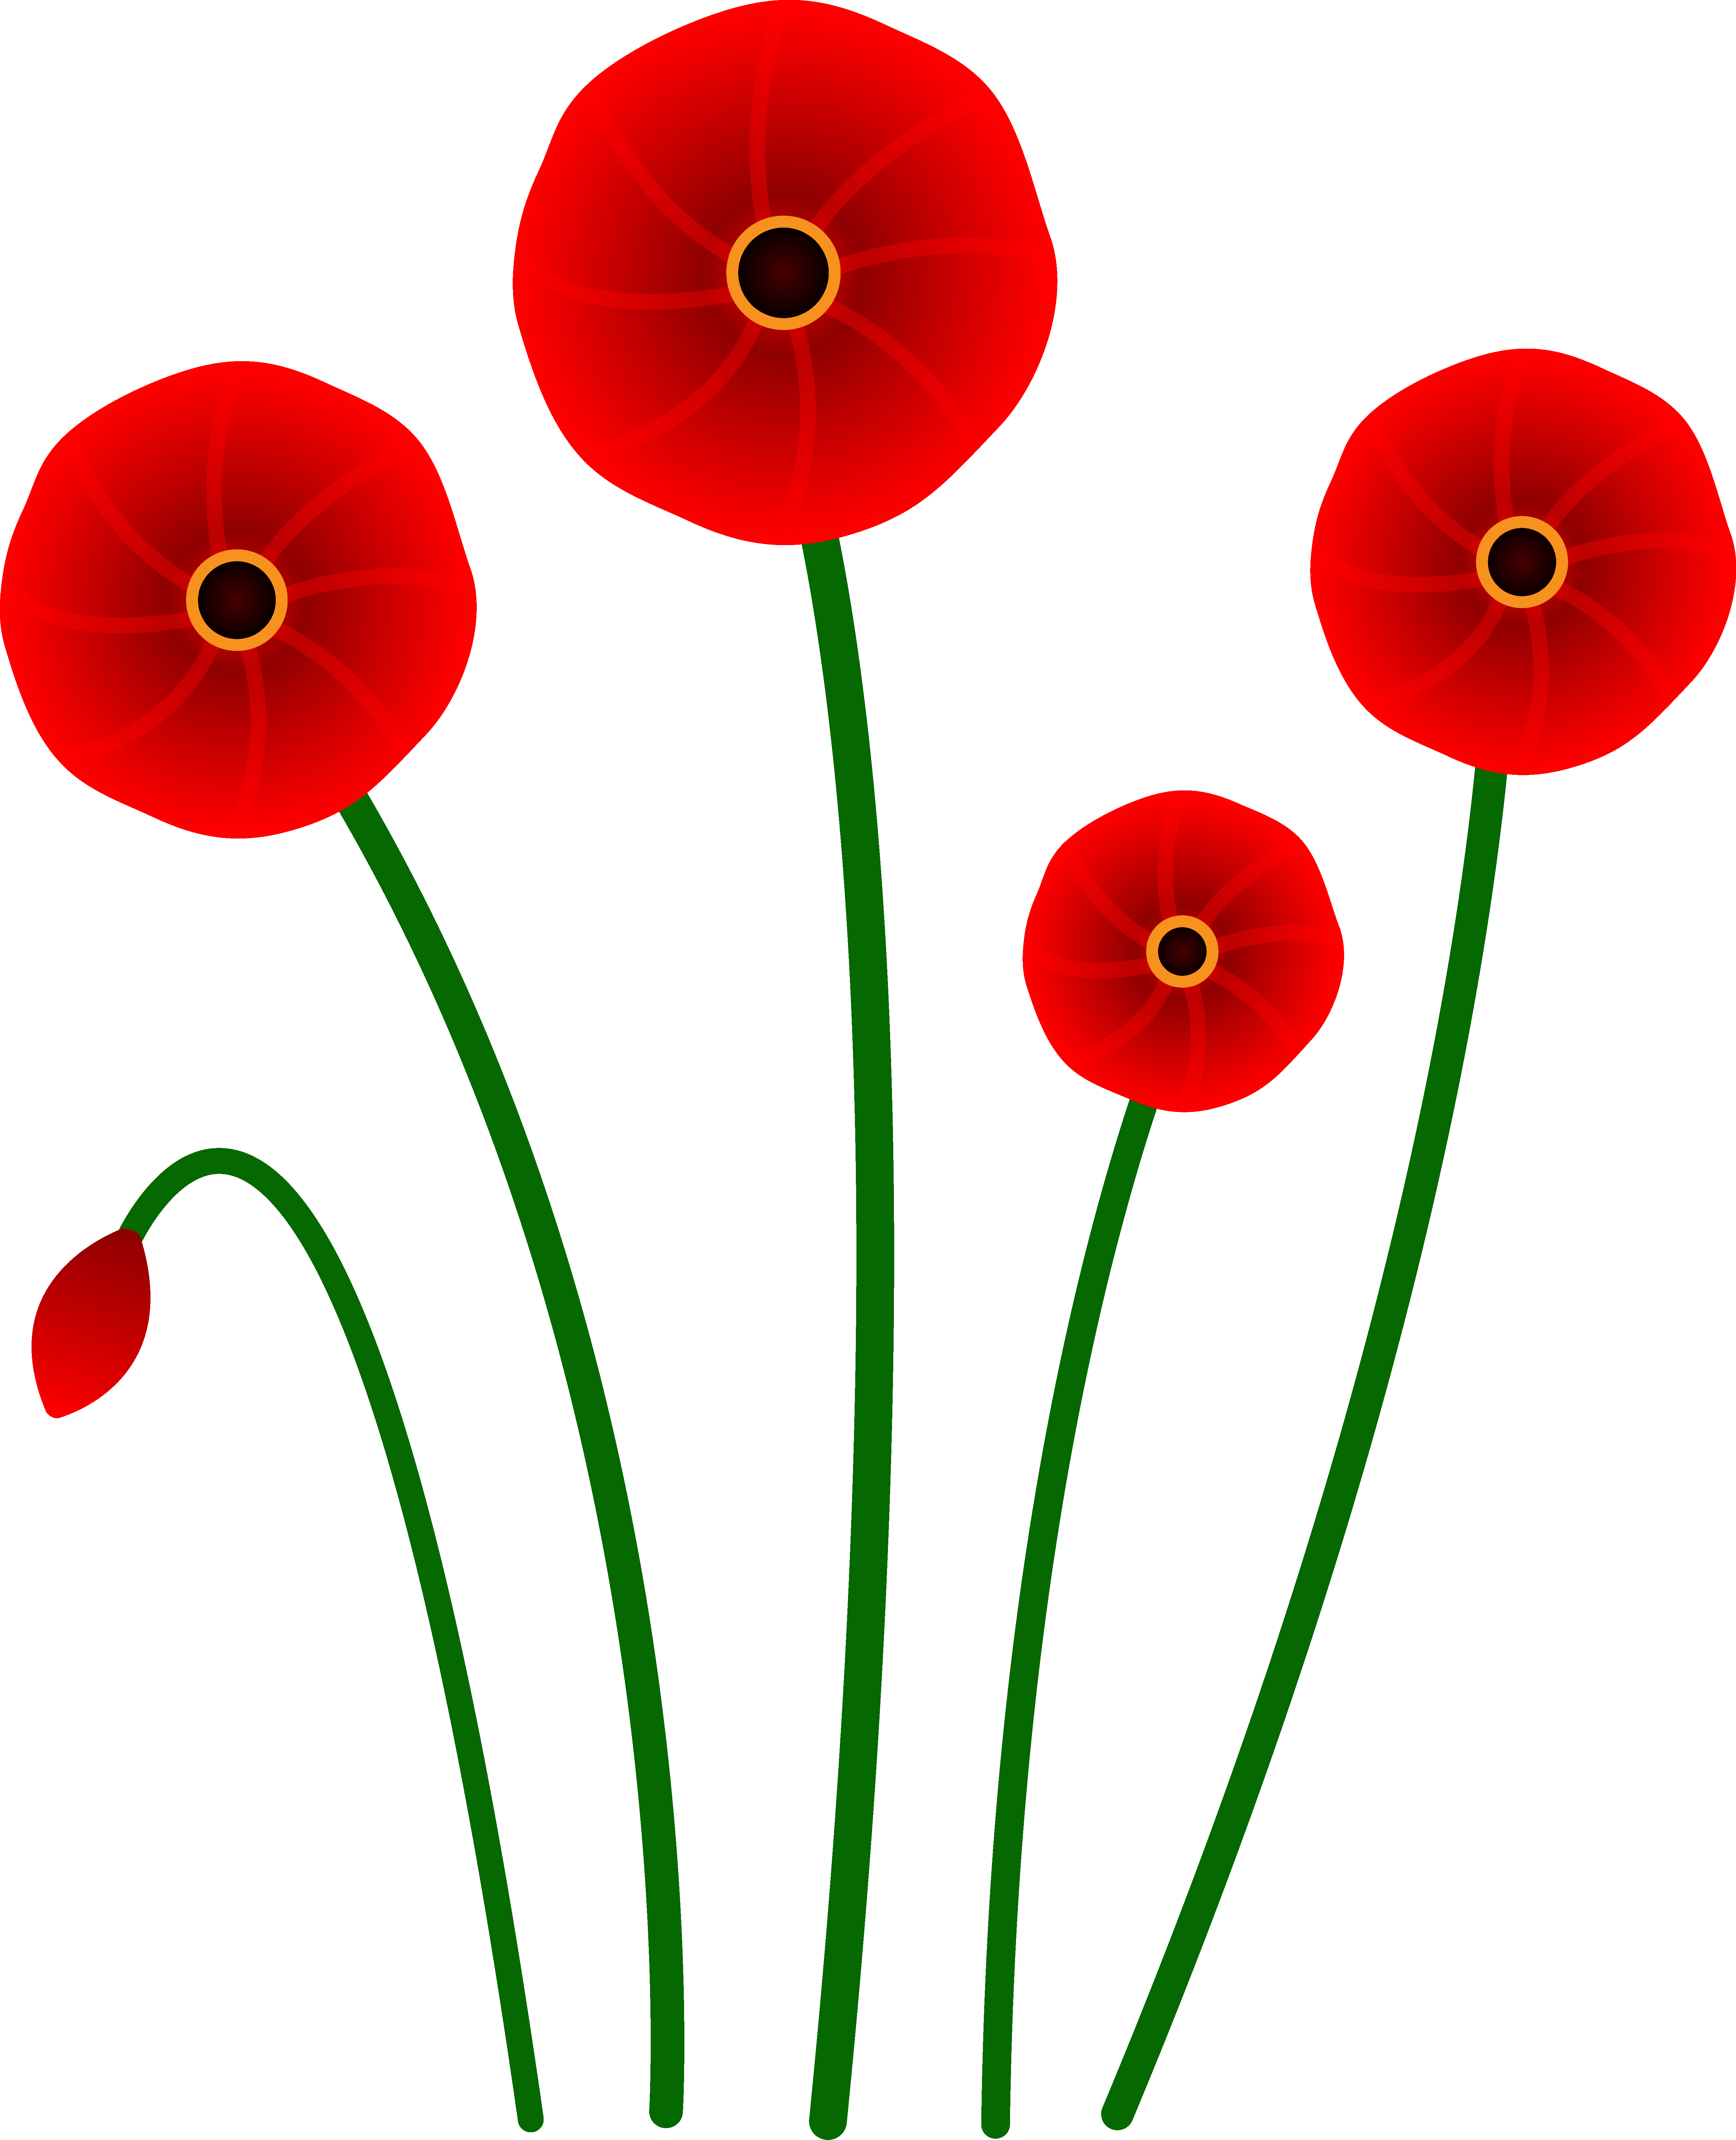 Red Flower Border Clip Art | Clipart Panda - Free Clipart Images